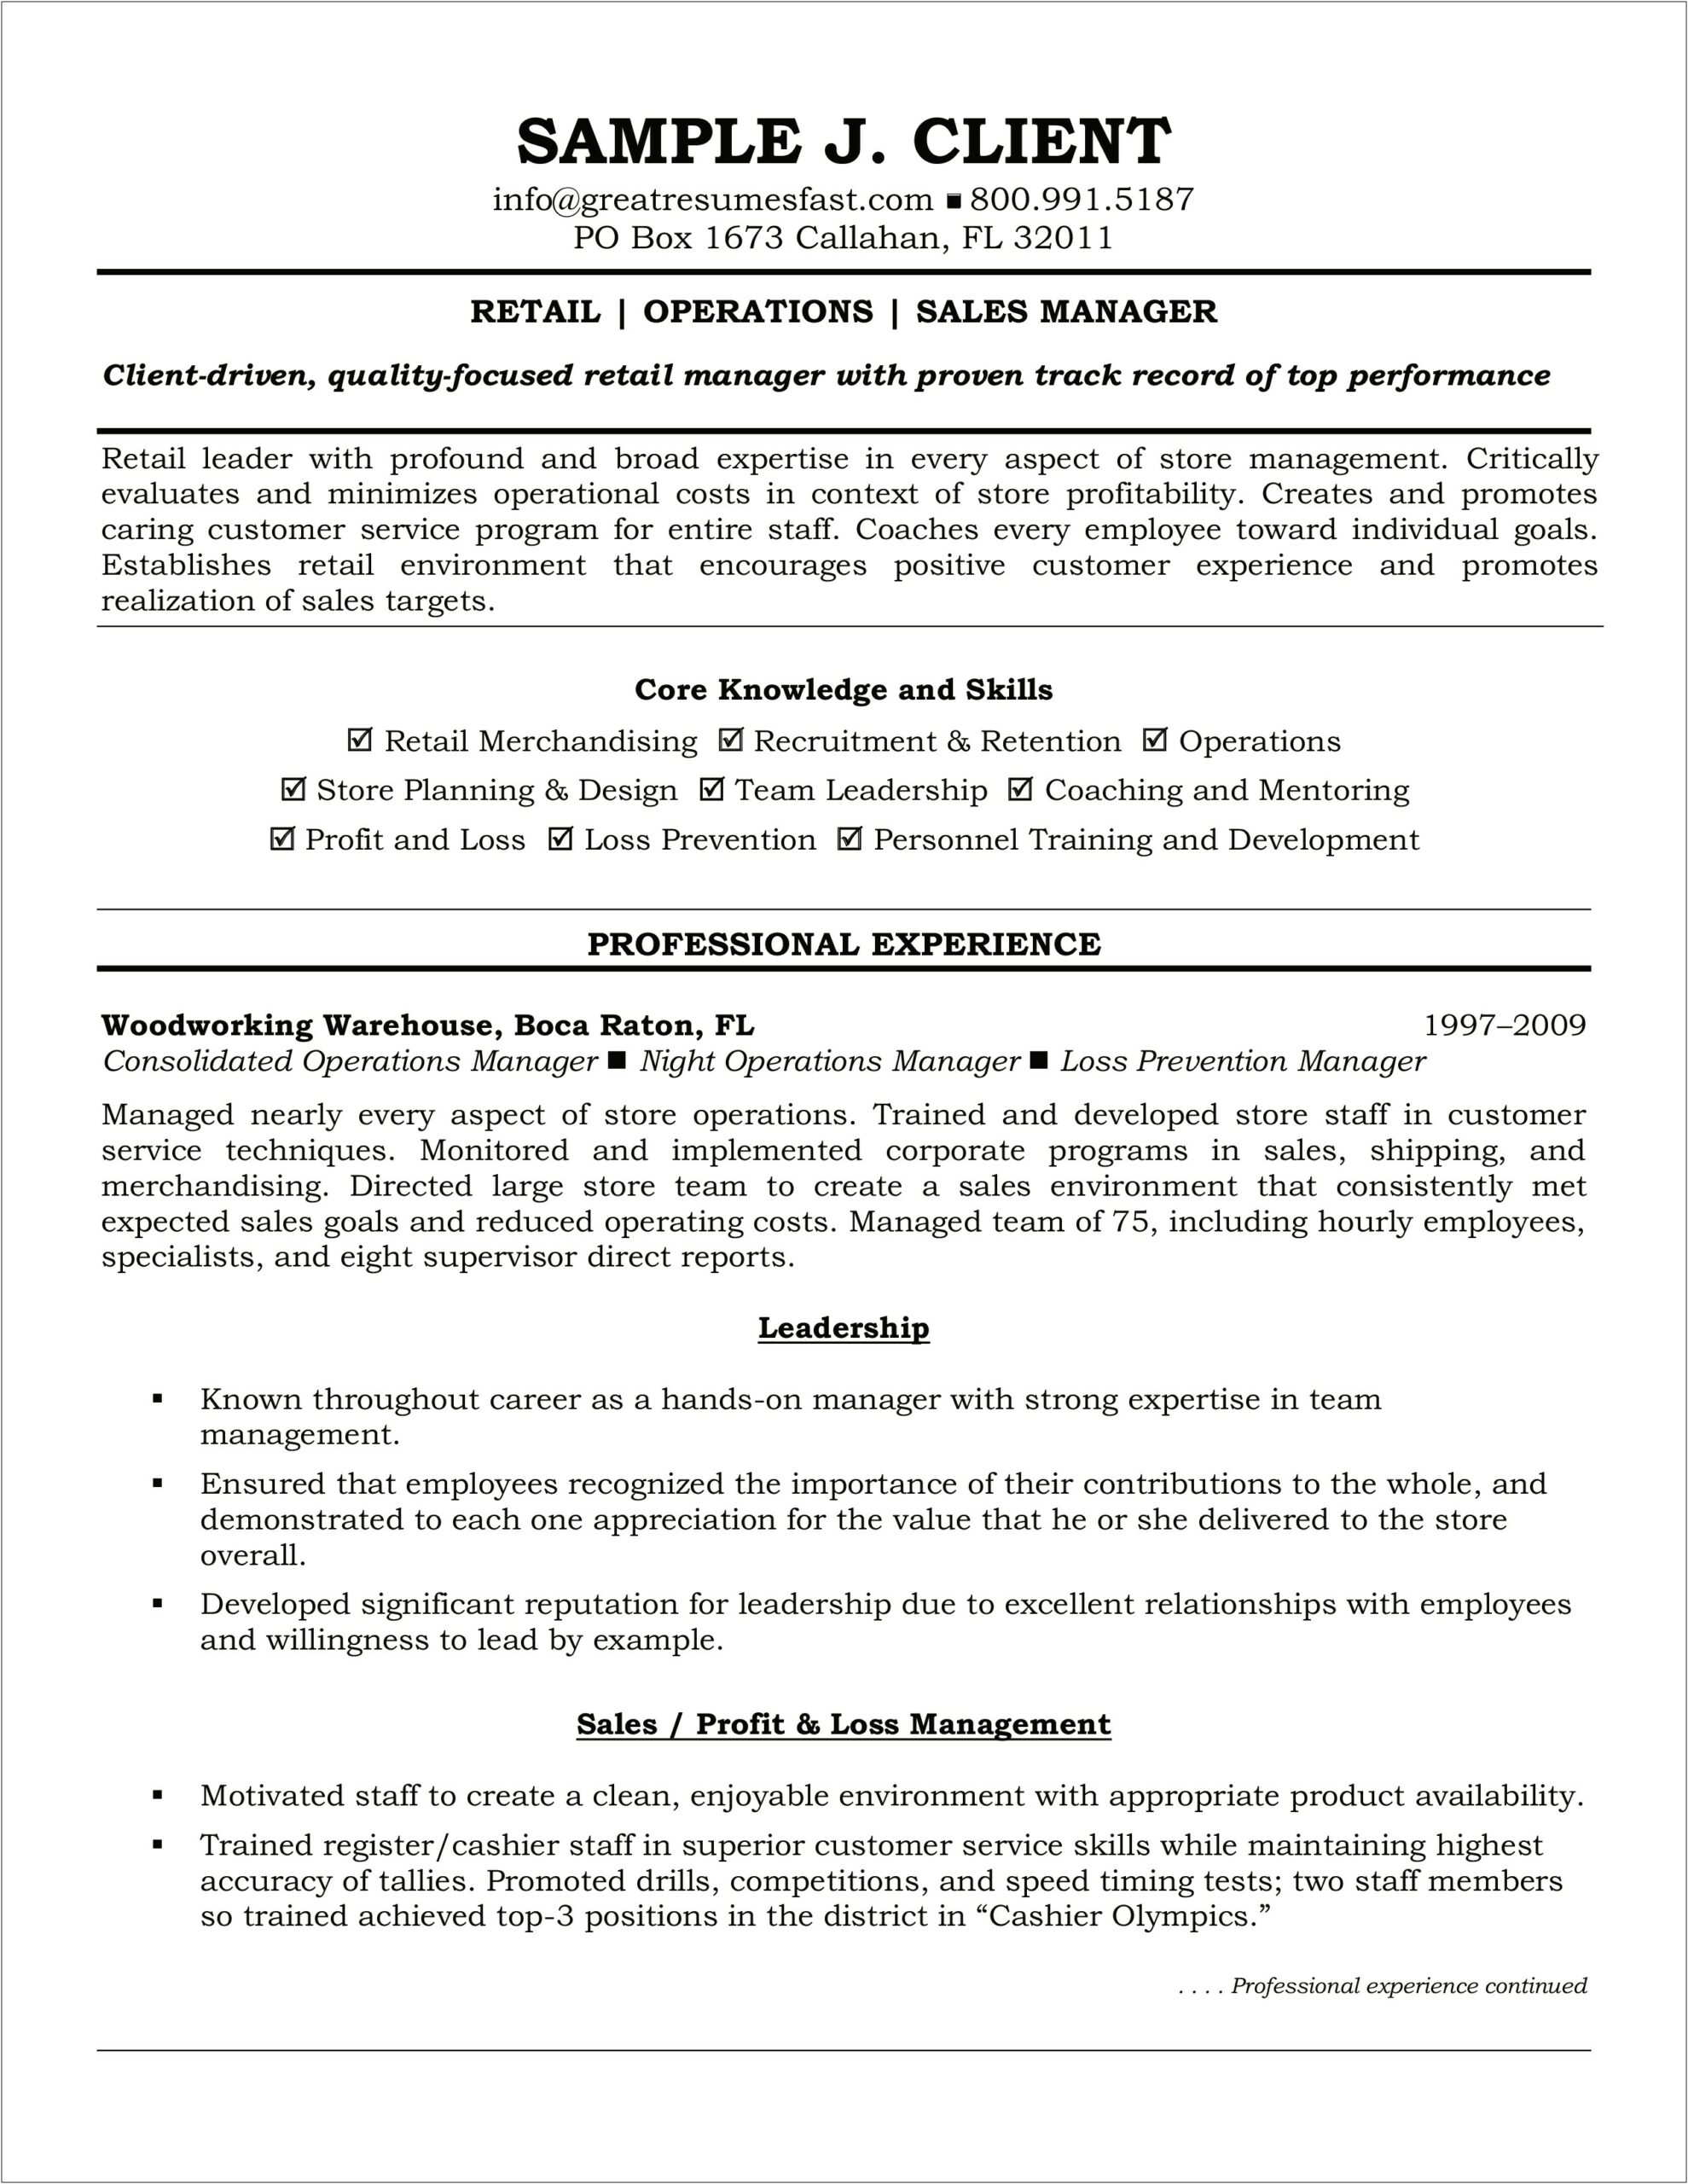 Call Center Sales Manager Resume